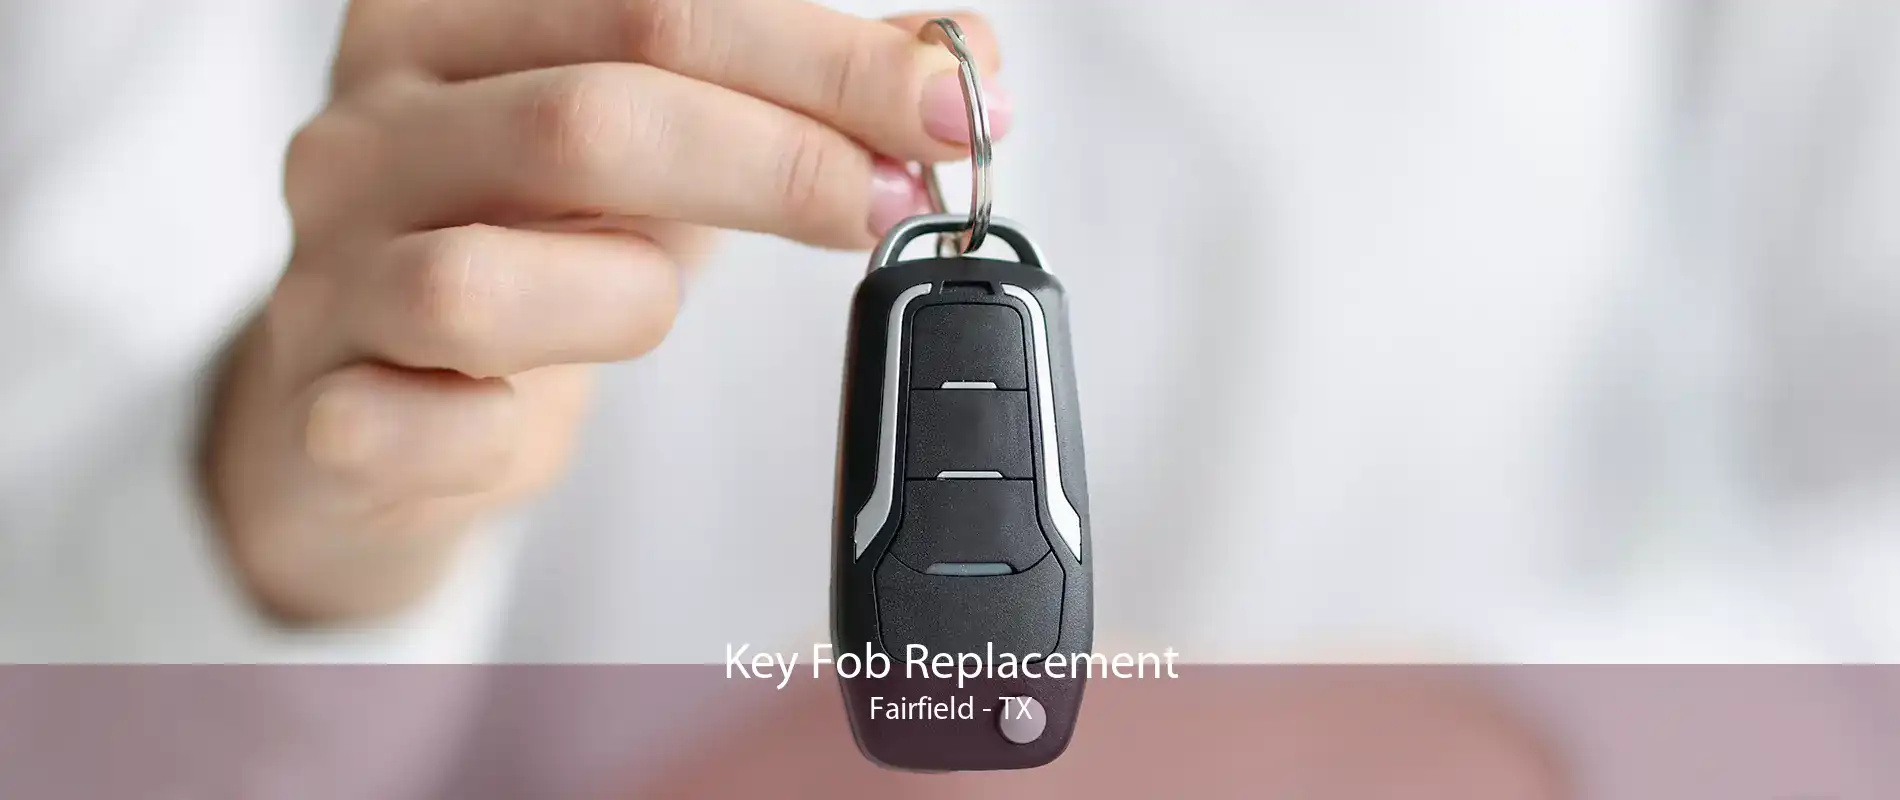 Key Fob Replacement Fairfield - TX